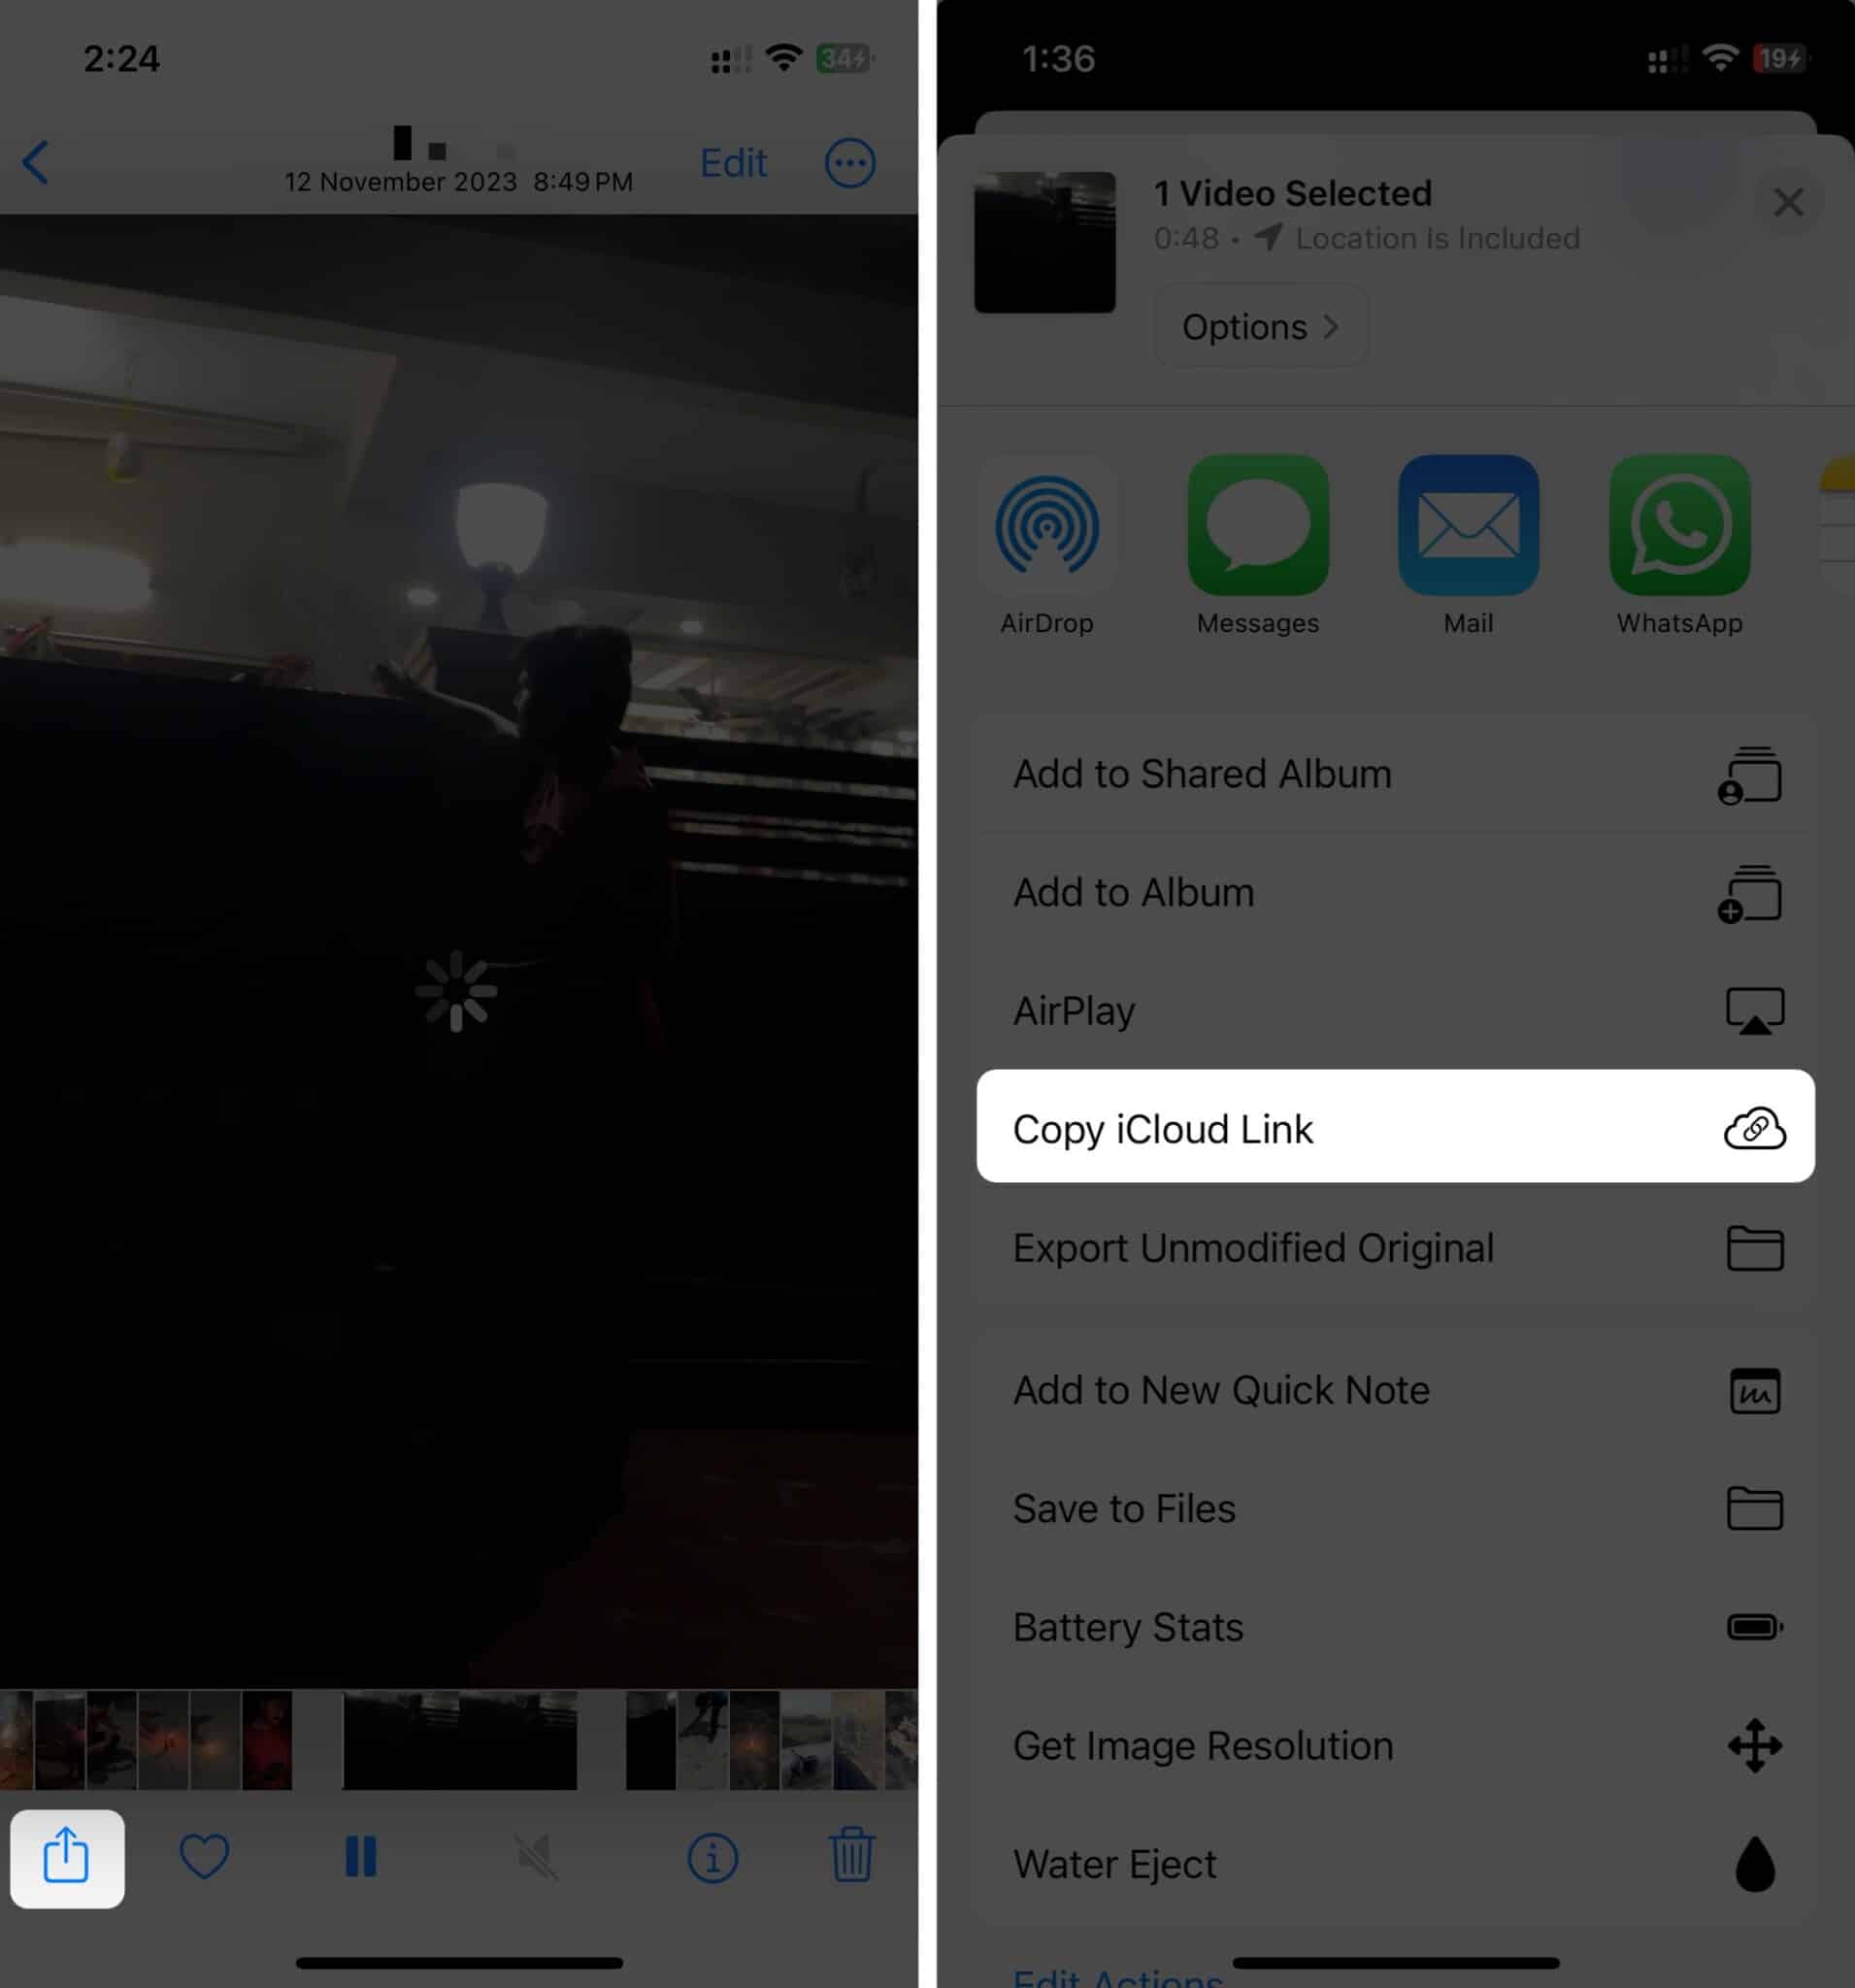 Copying iCloud Link from share sheet of video in the Photos app